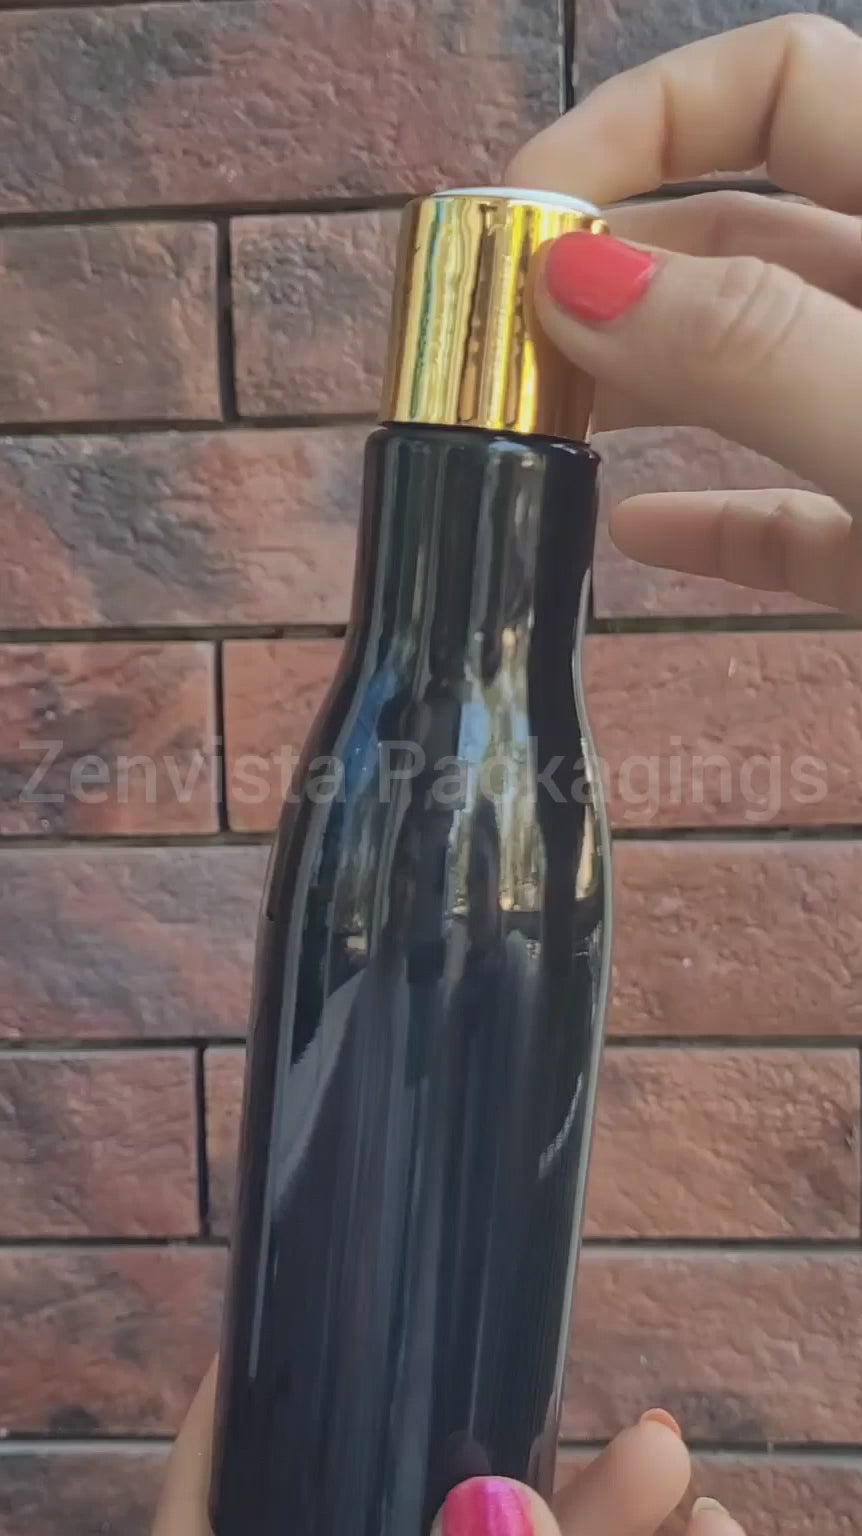 ZMK28 | BLACK COLOR ASTA BOTTLE WITH GOLD PLATED DISKTOP CAP | 200ML |